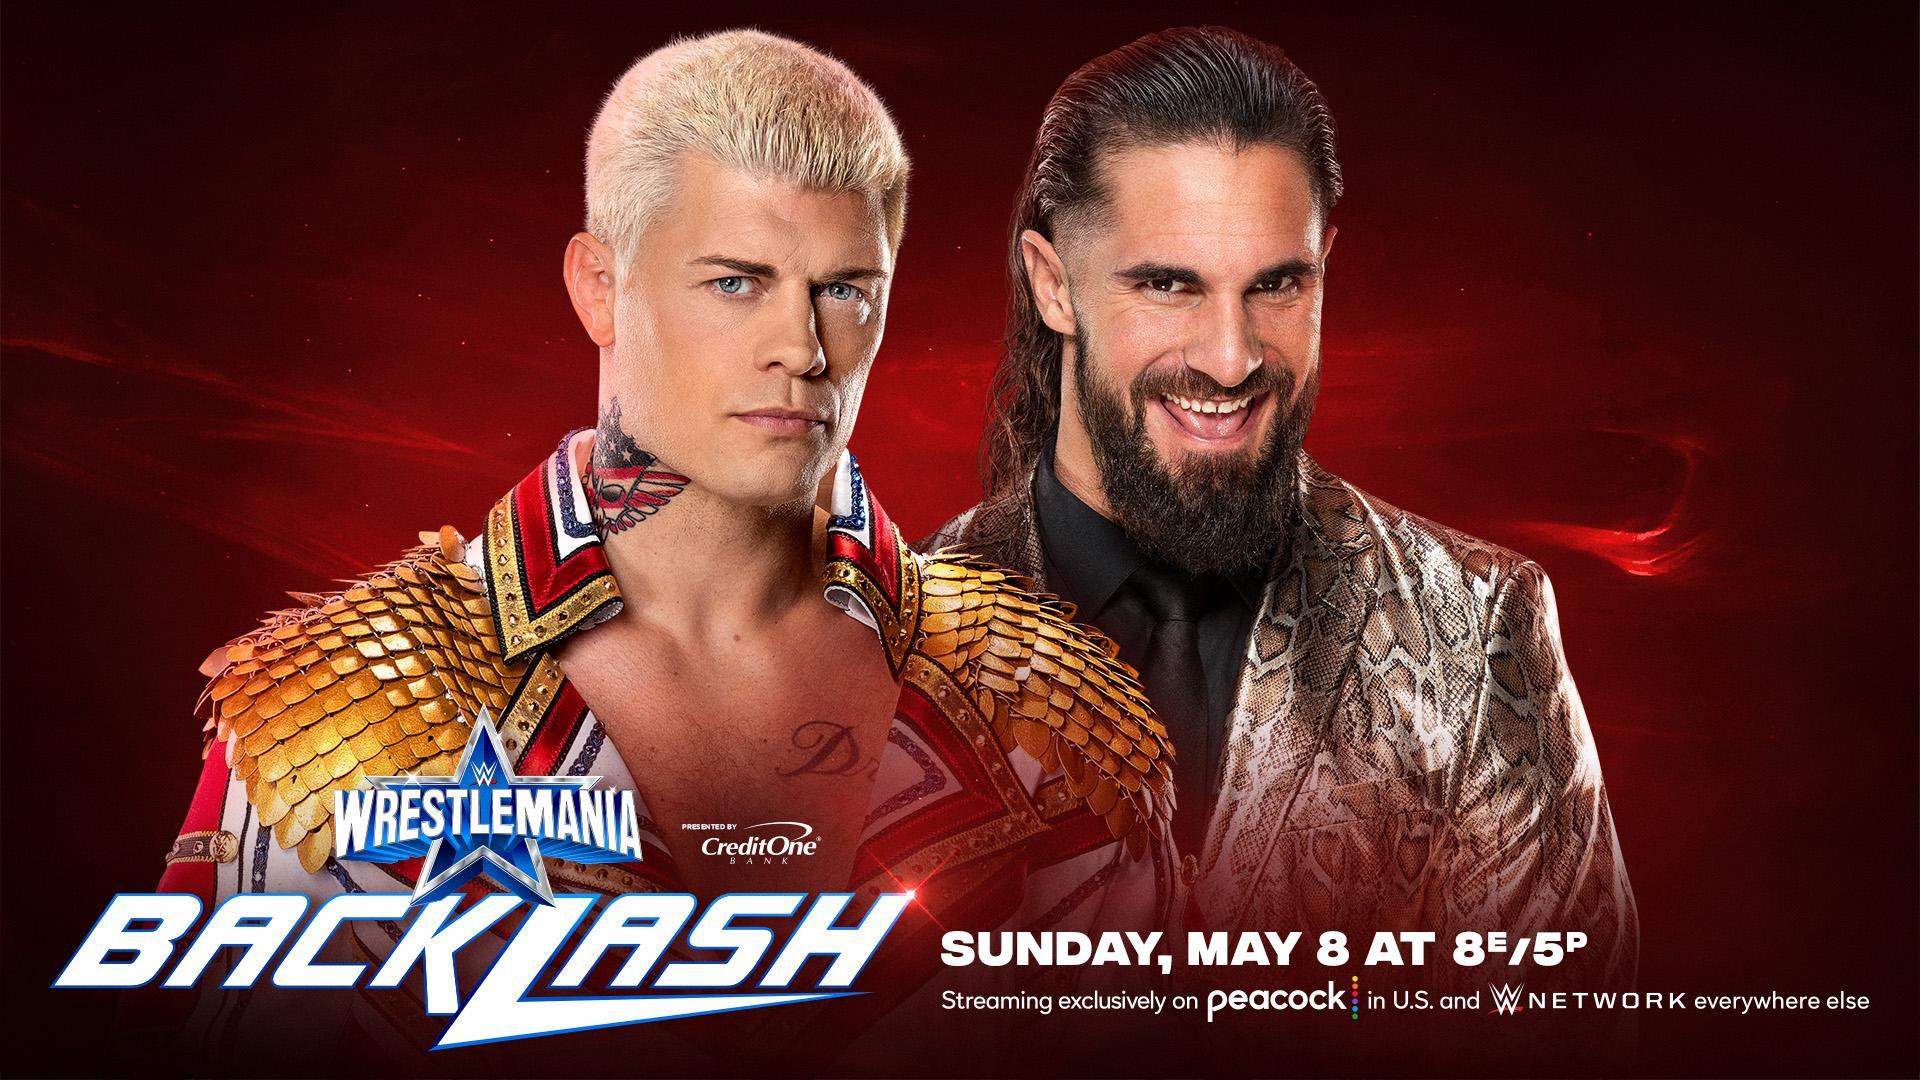 WWE WrestleMania Backlash 2022 Picks: Rhodes vs. Rollins, Flair vs. Rousey, More. Bleacher Report. Latest News, Videos and Highlights